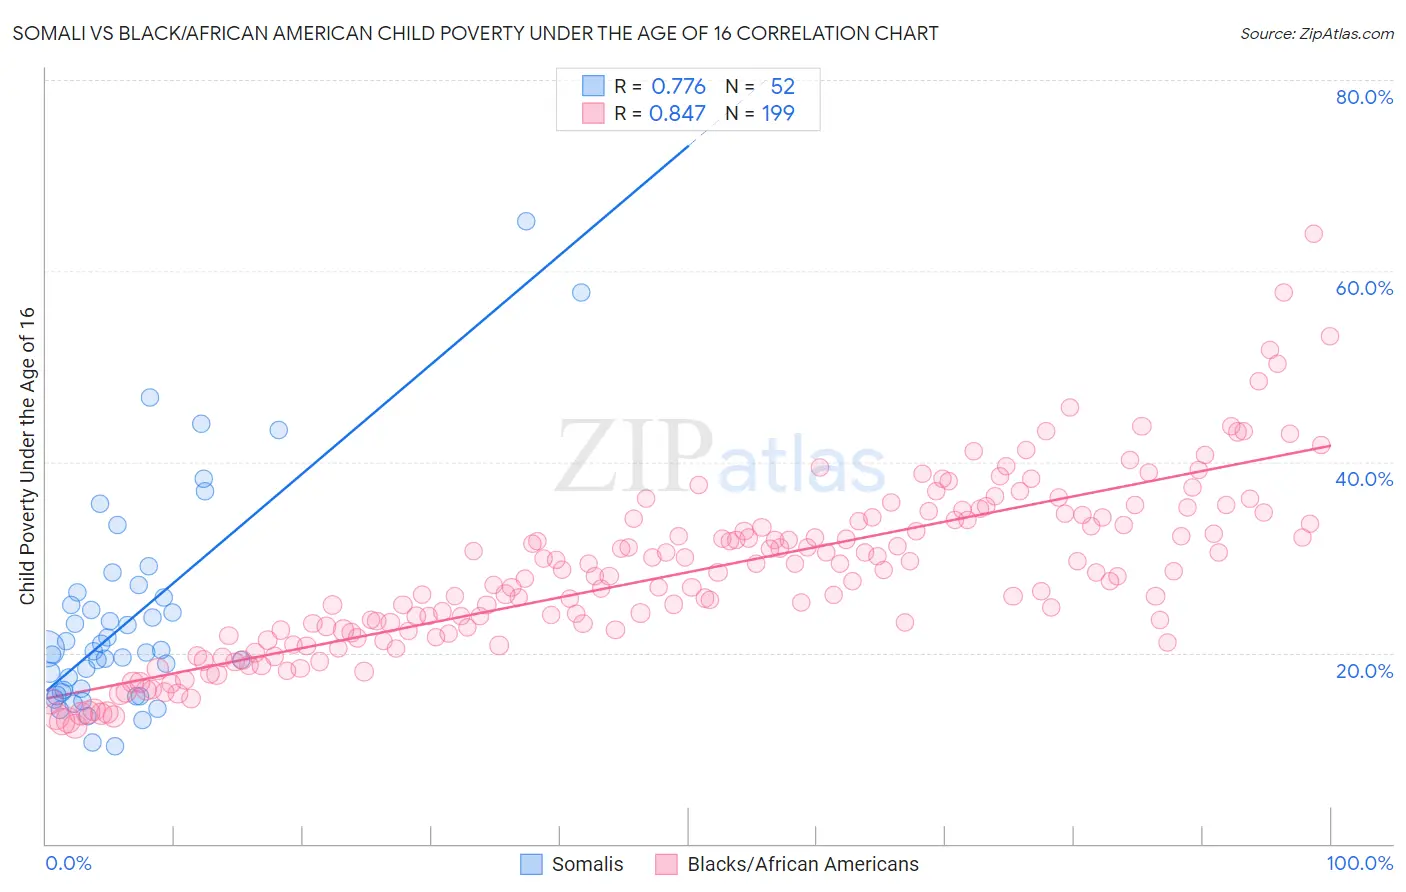 Somali vs Black/African American Child Poverty Under the Age of 16